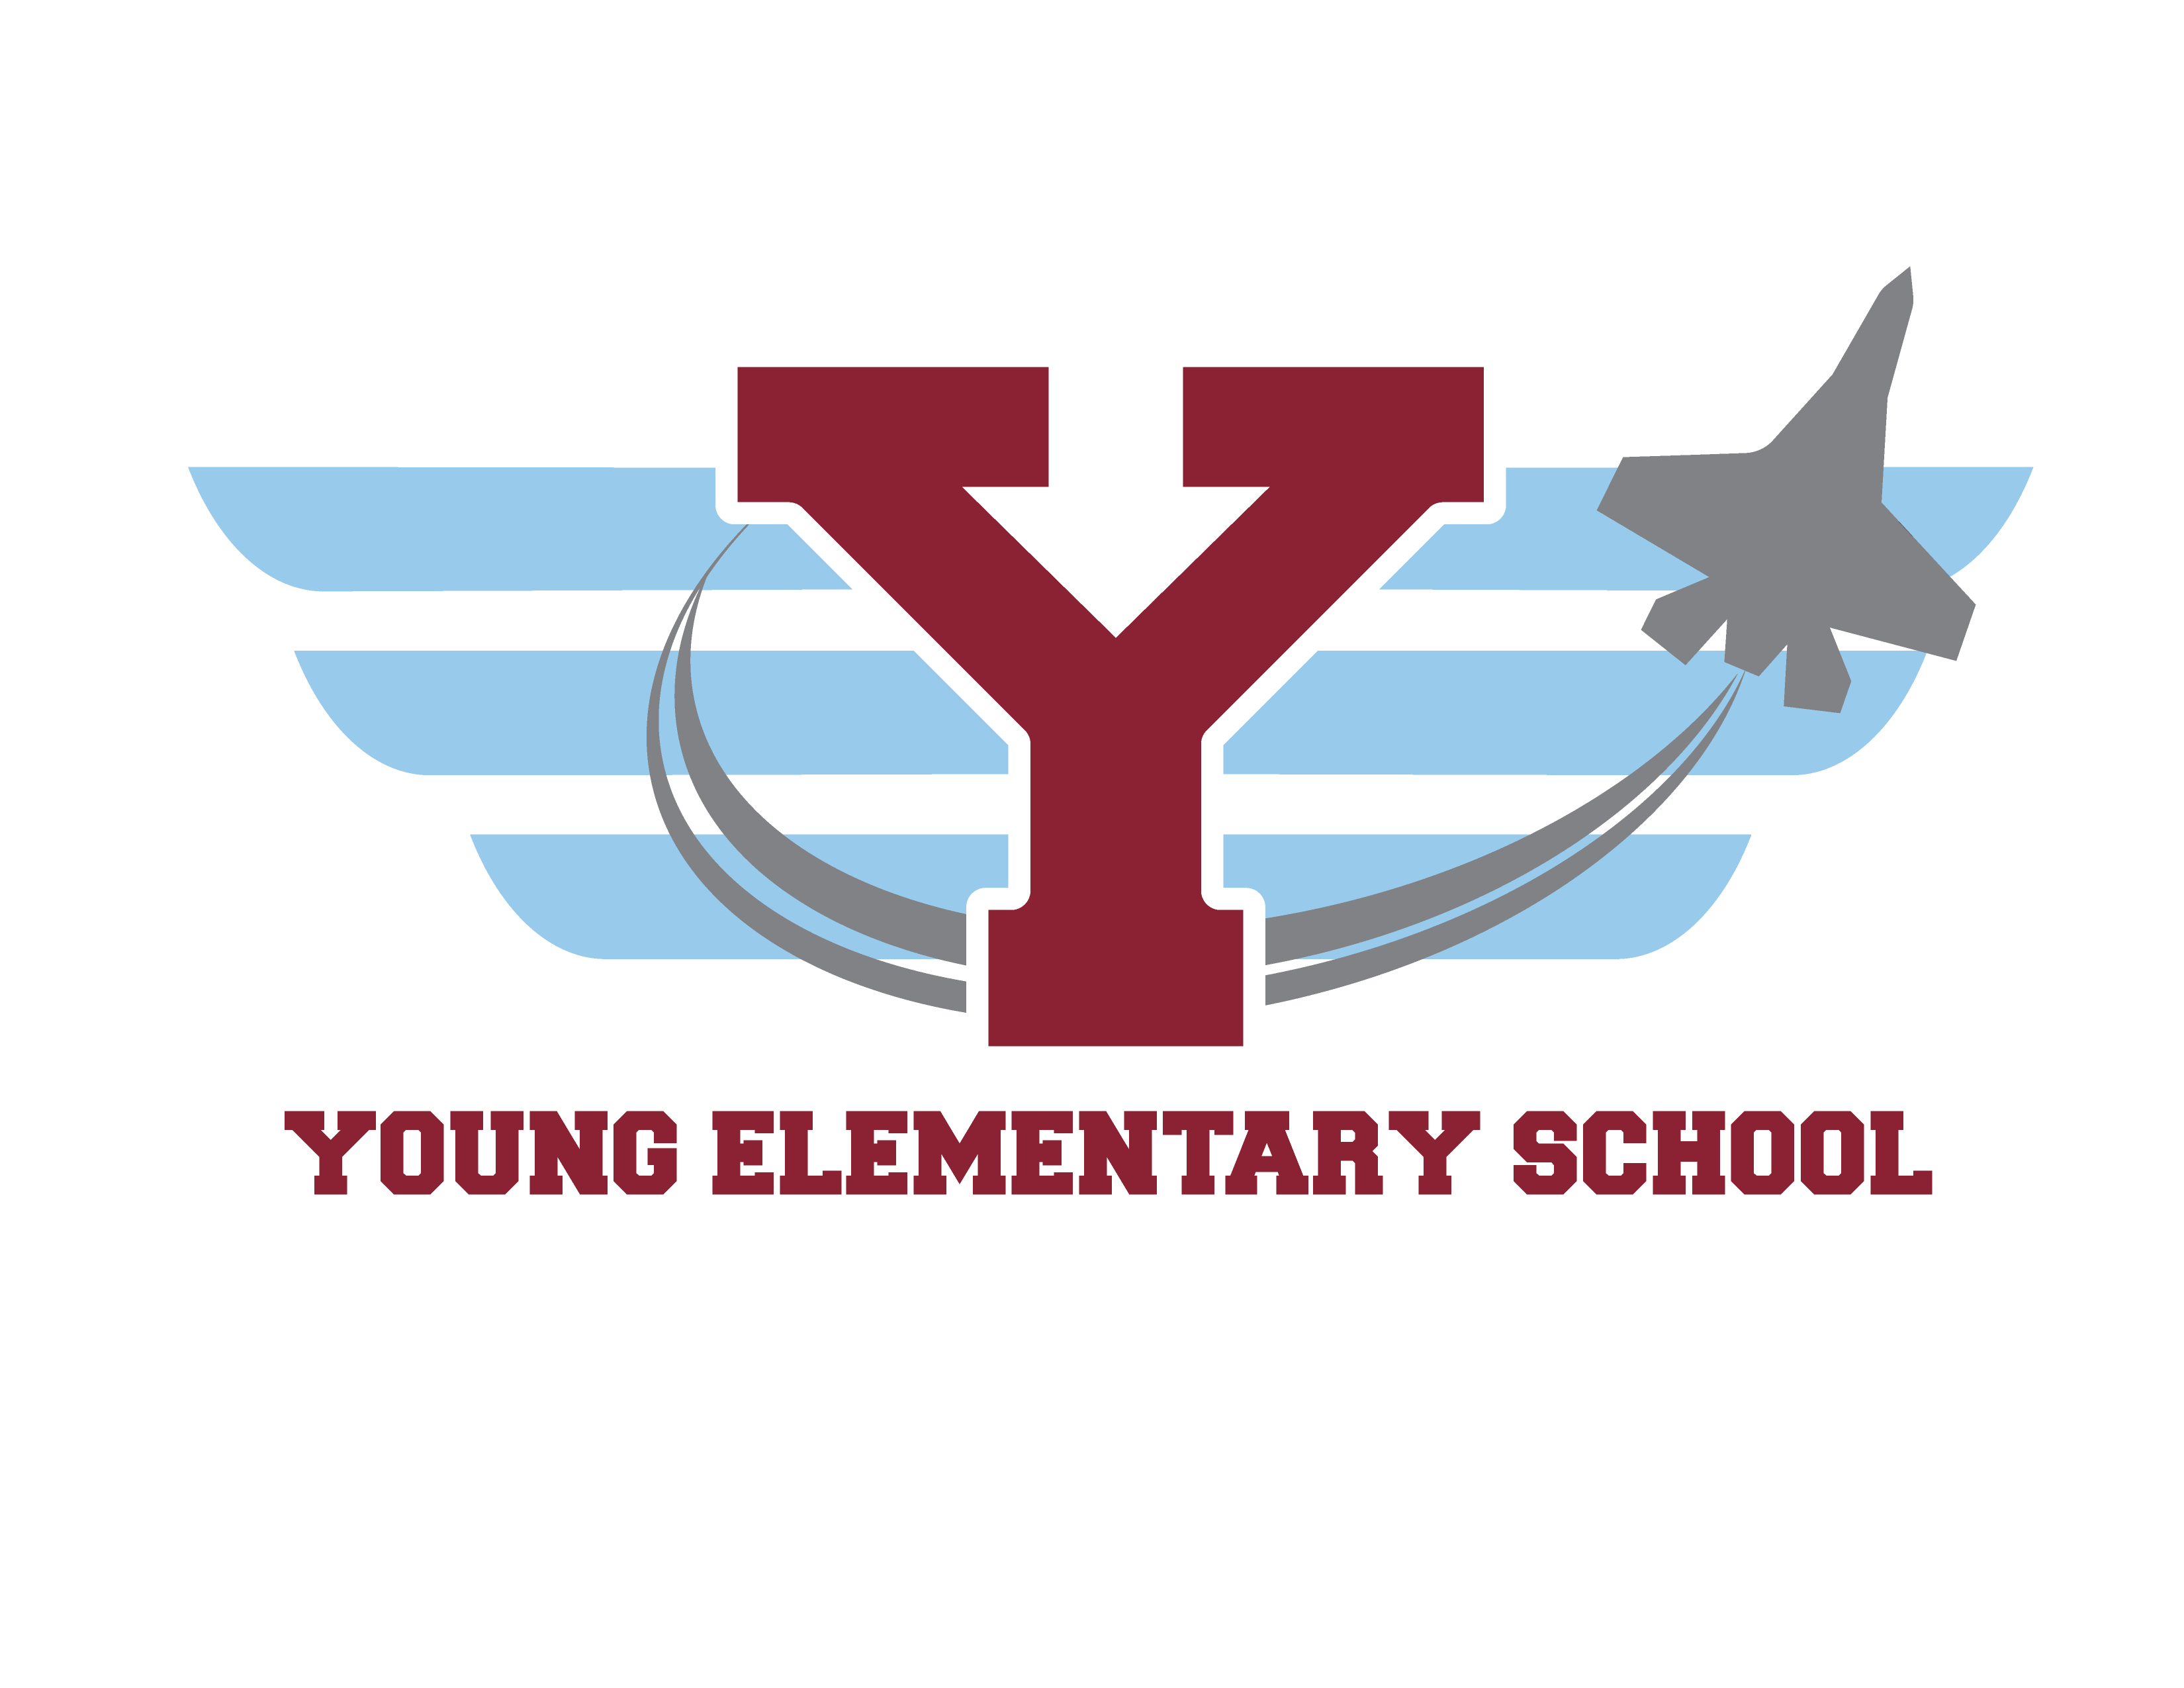 young logo